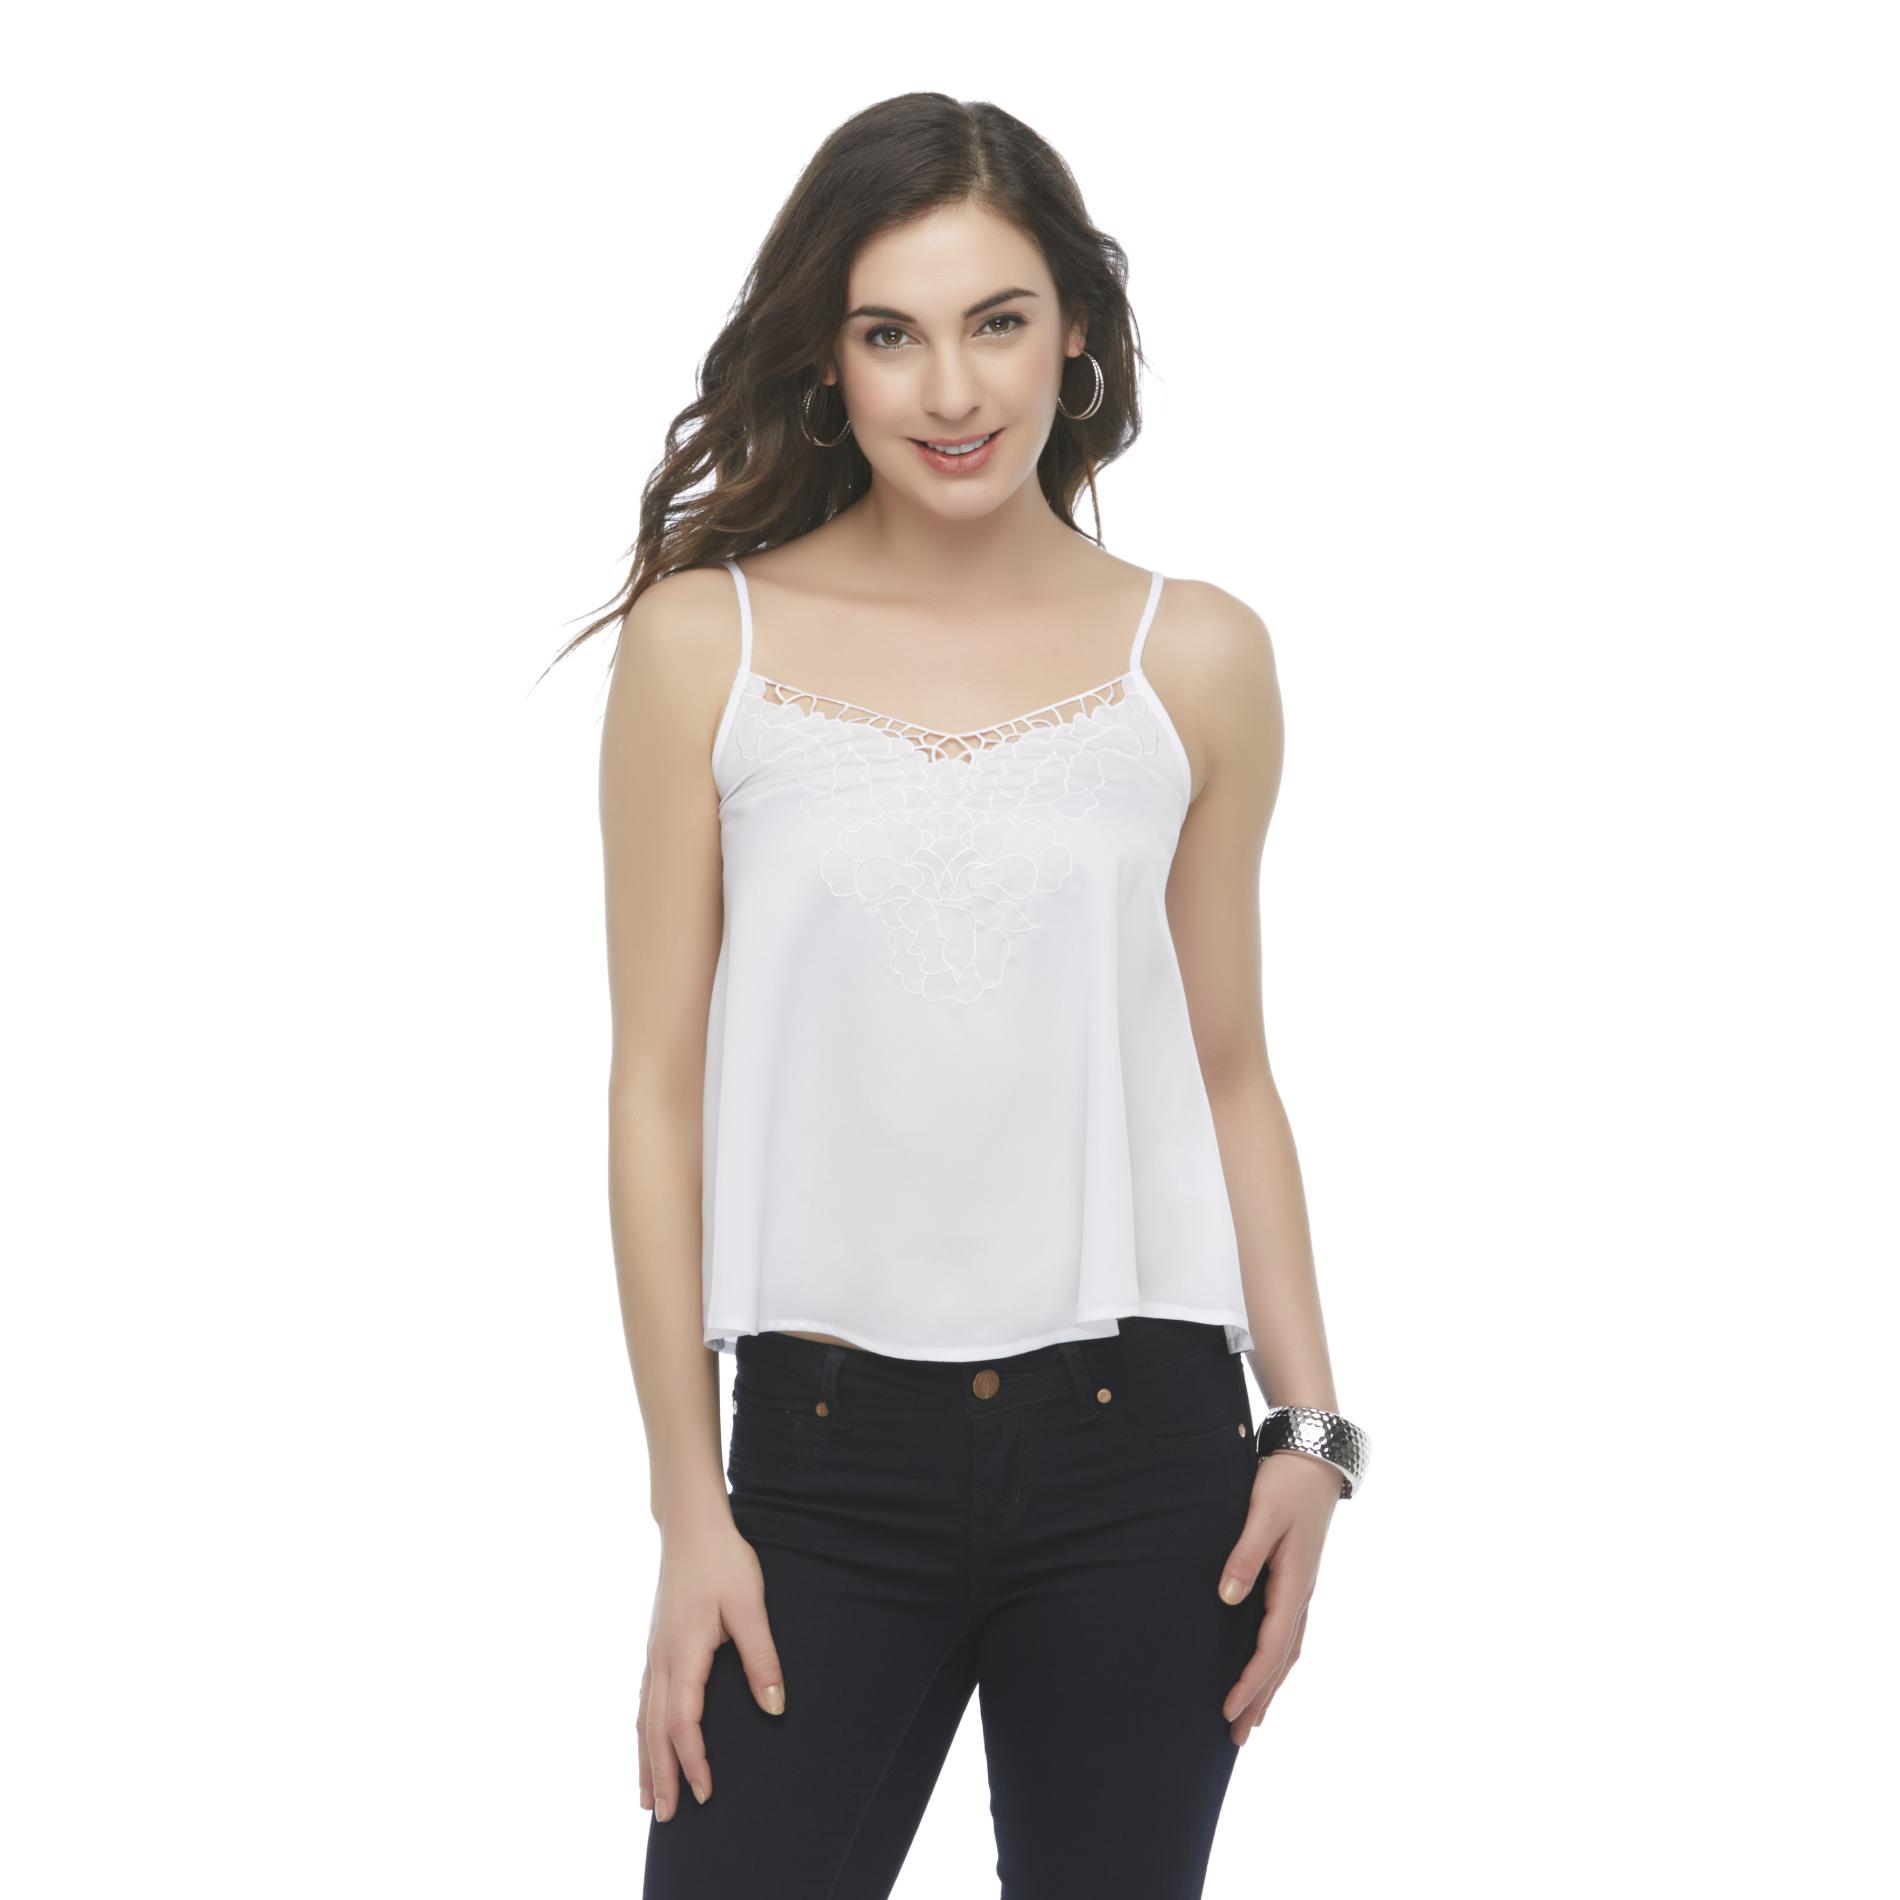 Attention Women's Embroidered Camisole